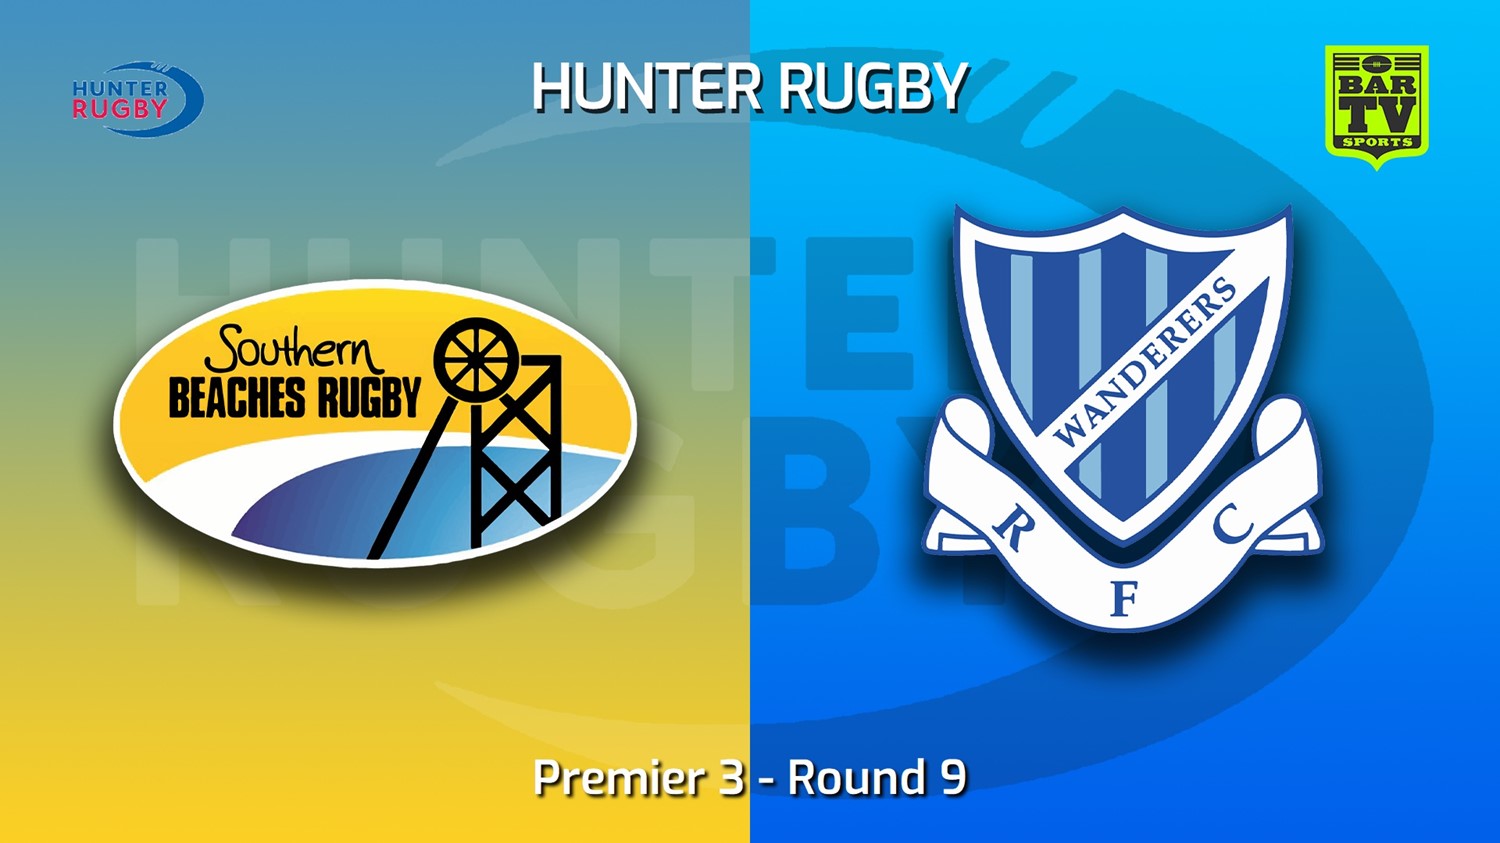 220625-Hunter Rugby Round 9 - Premier 3 - Southern Beaches v Wanderers Slate Image